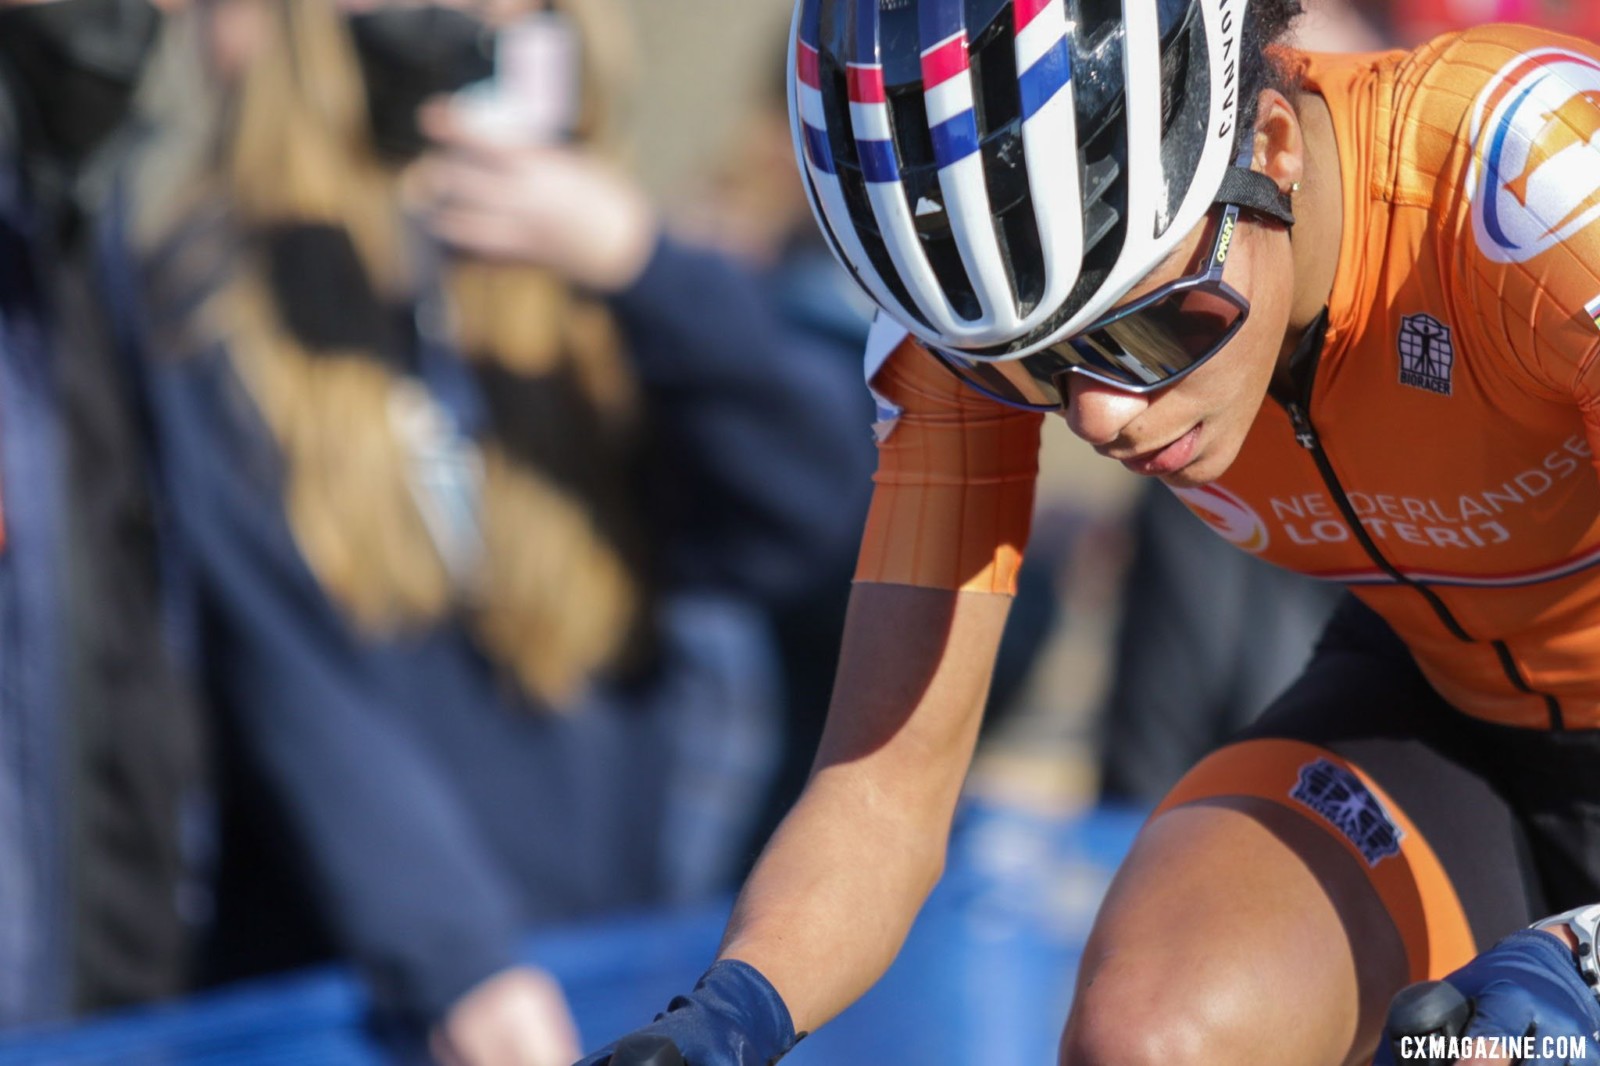 Ceylin del Carmen Alvarado had a fast start and battled for bronze before a crash had her sprinting for fourth. Elite Women. 2022 Cyclocross World Championships, Fayetteville, Arkansas USA. © D. Mable / Cyclocross Magazine